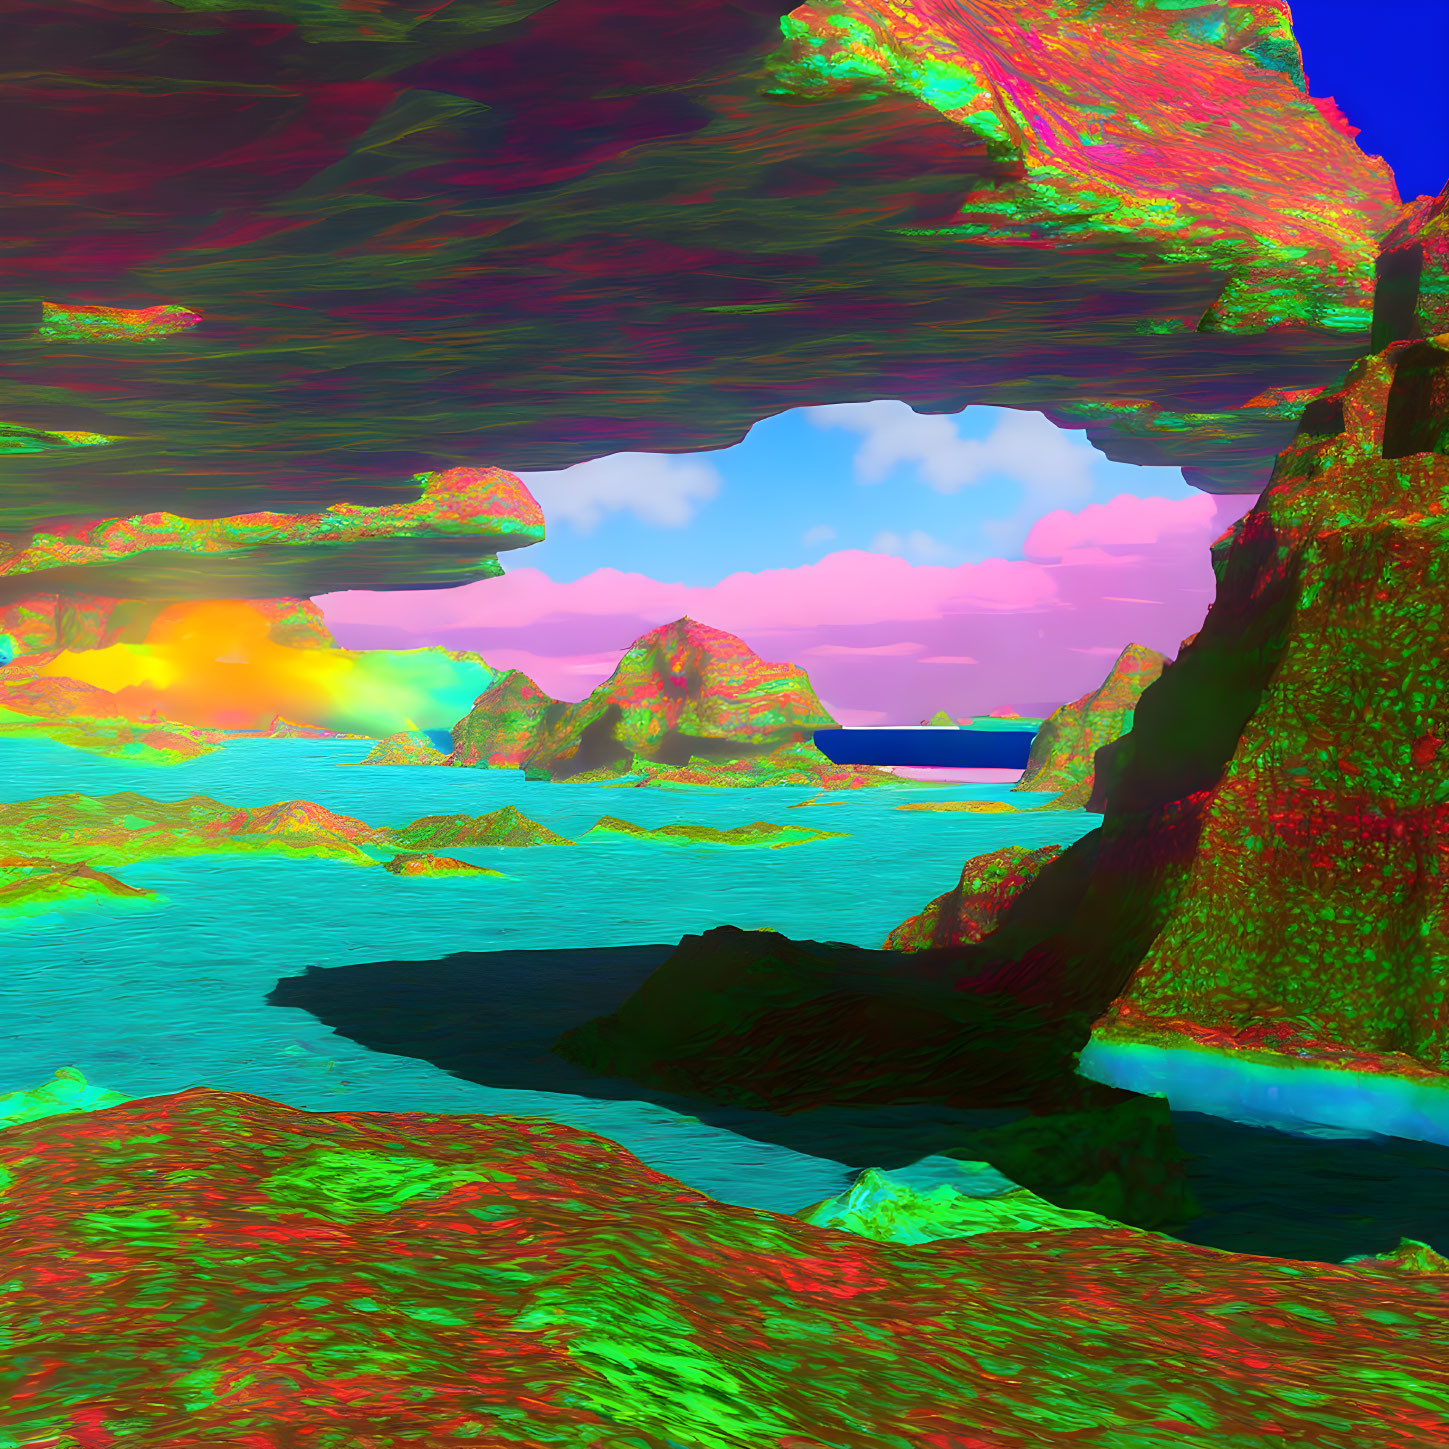 Colorful Psychedelic Landscape Overlooking Turquoise Sea